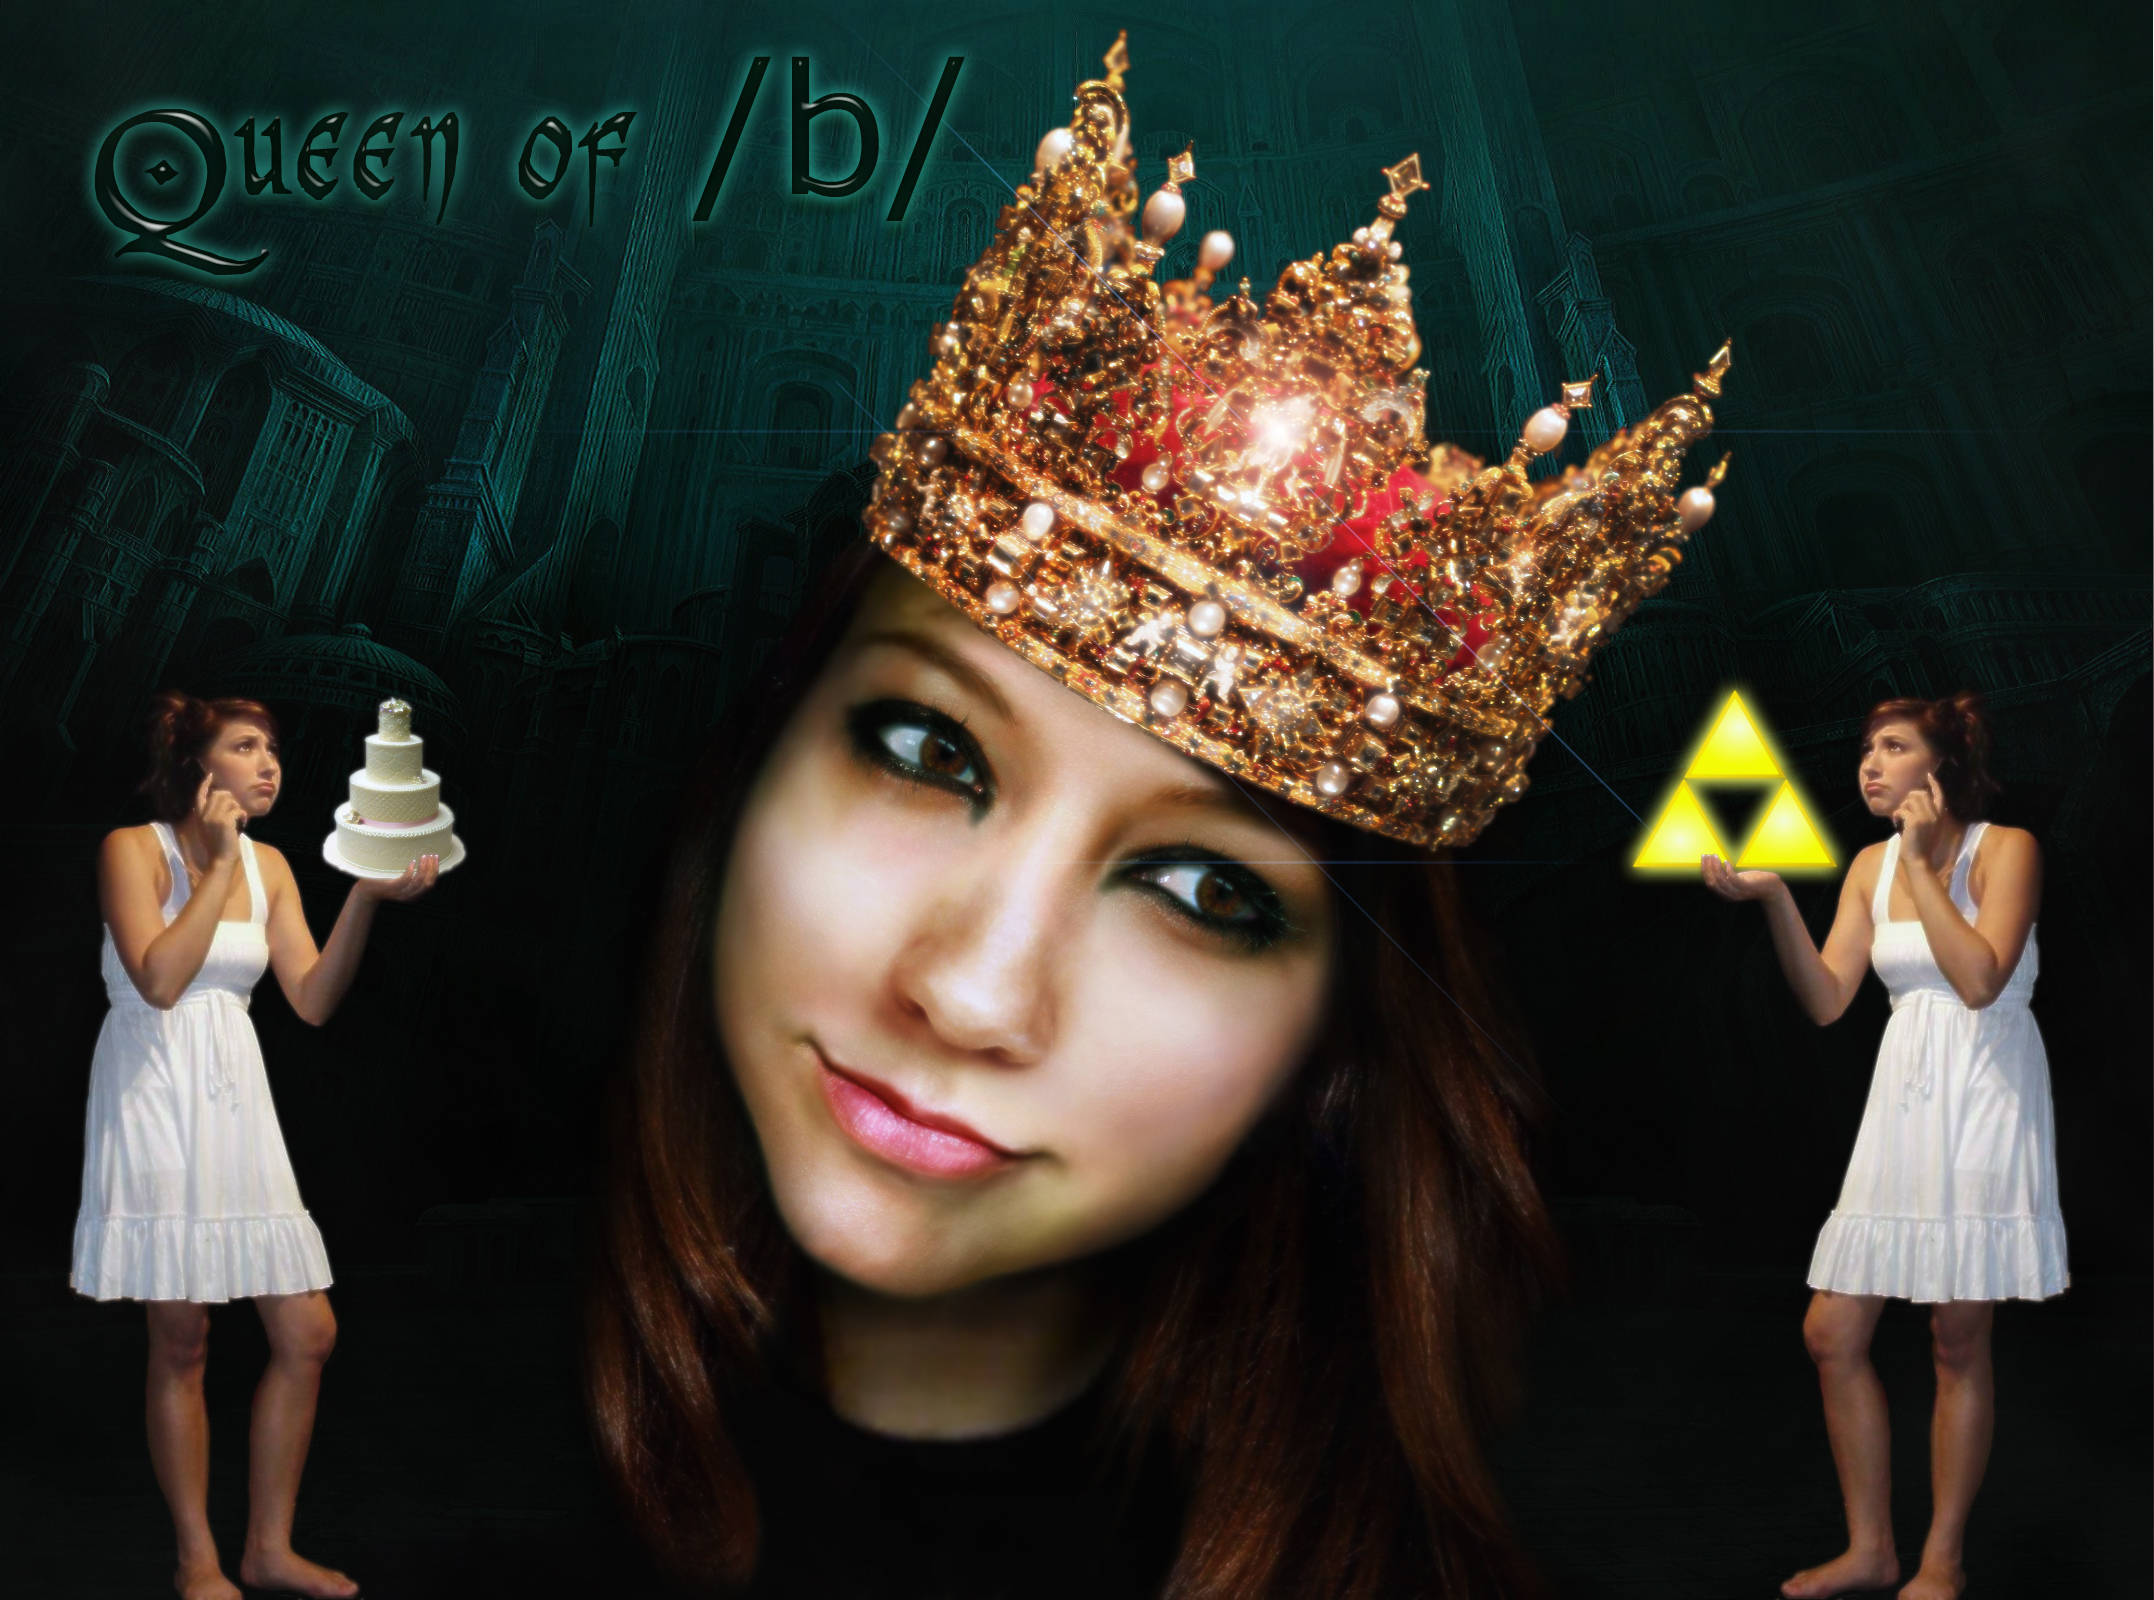 Boxxy Wallpapers